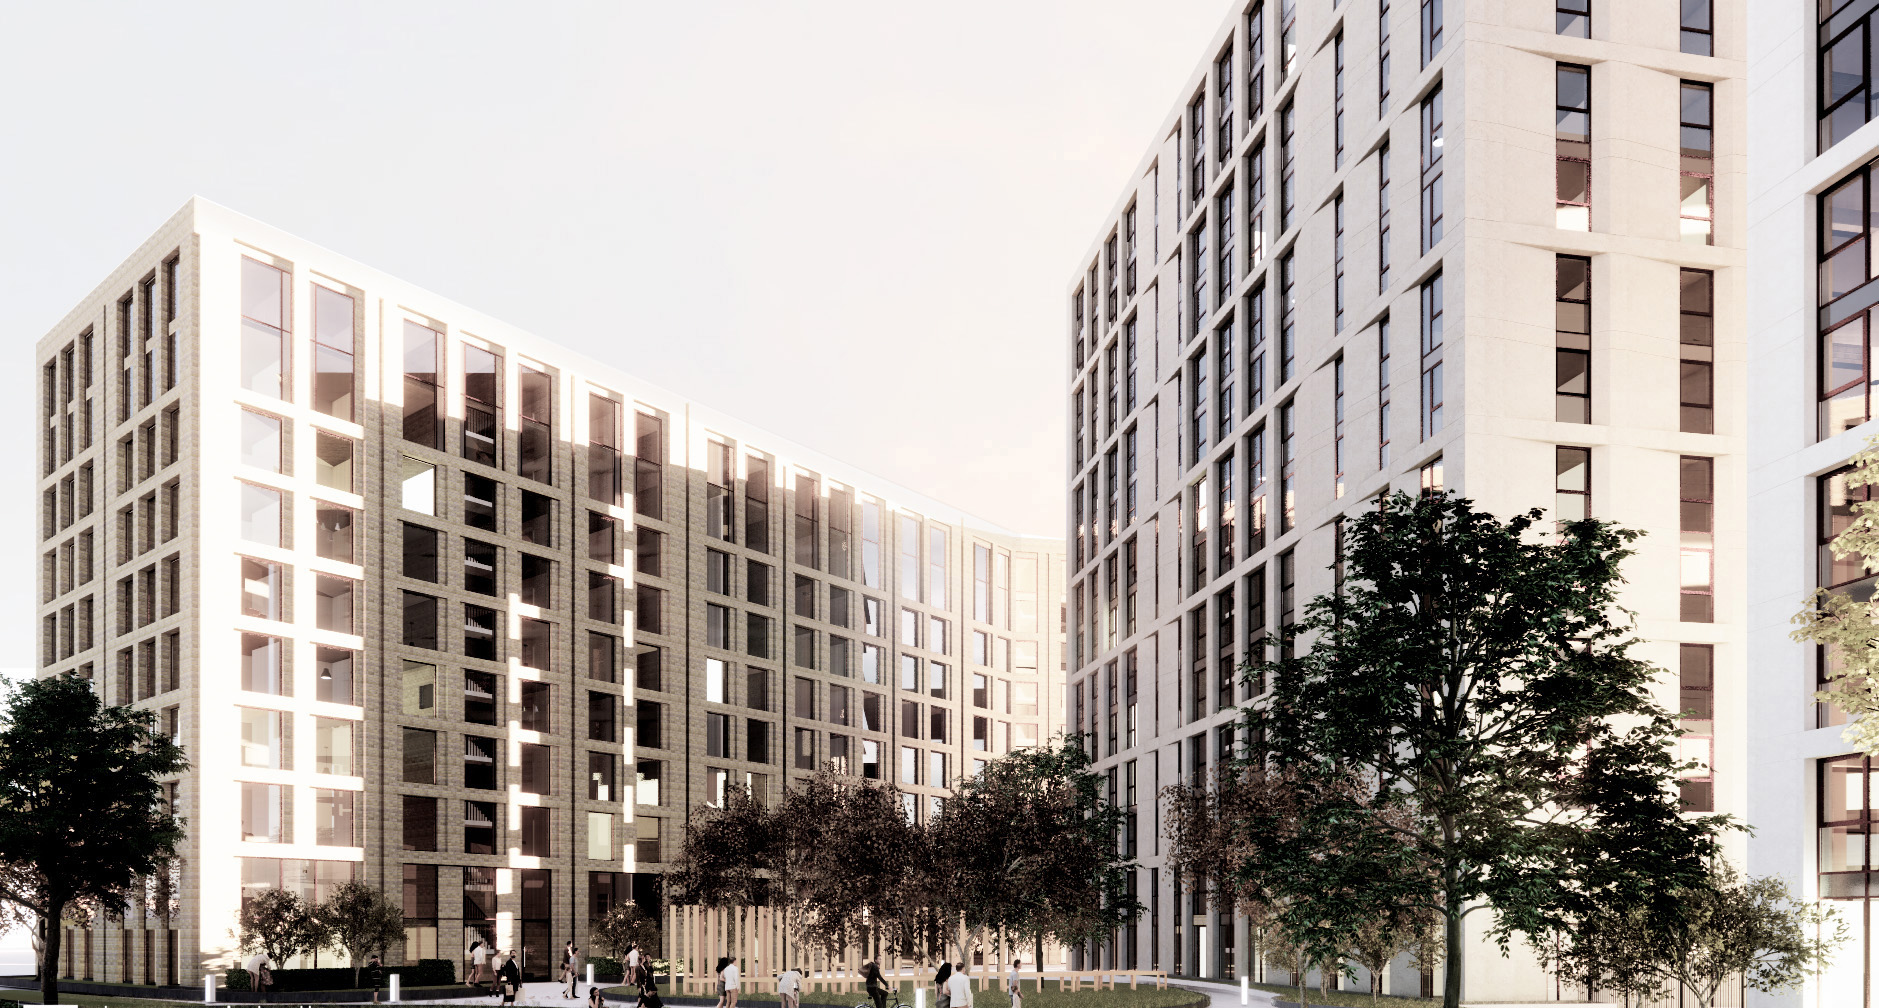 New Garden Square set to be transformed with Build-to-Rent Scheme